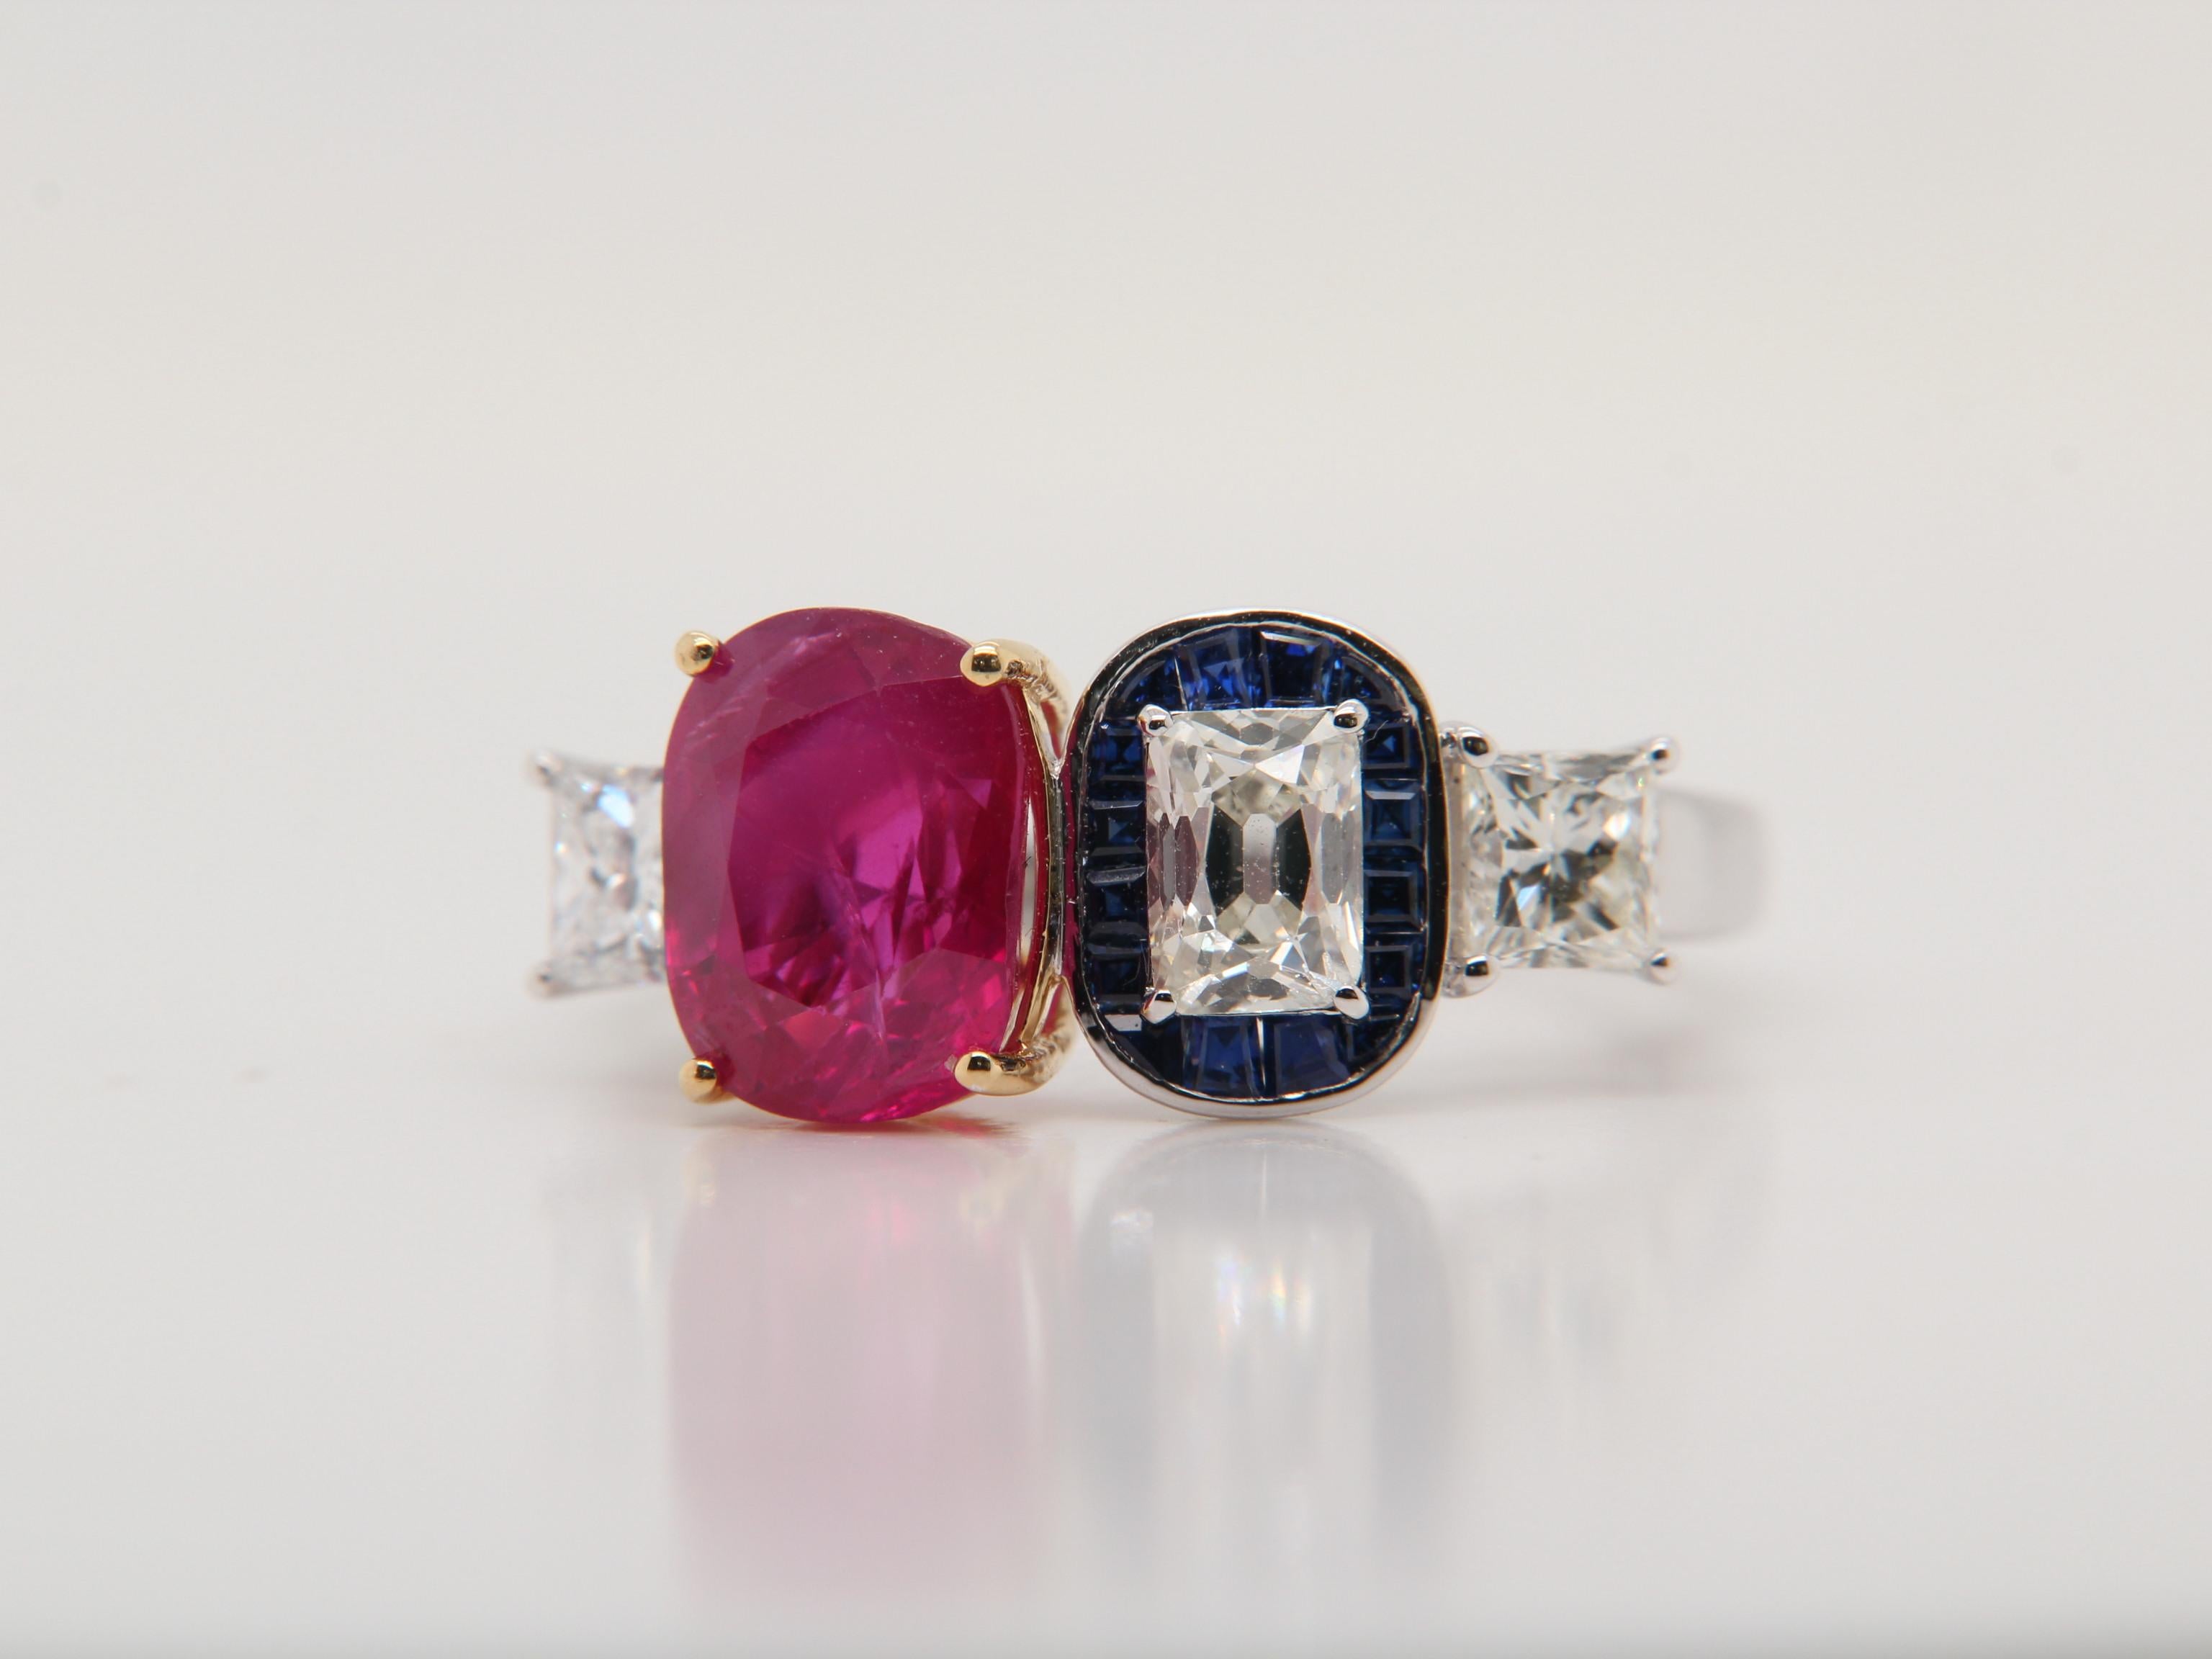 A new 3.03 carat Burmese ruby ring made in 18 Karat gold. The ruby is certified by AGL (Thai) as natural, unheated, 'Purplish-Red', and from the mine 'Mogok'. The total diamond weight is 1.12 carats, total blue sapphire weight is 0.27 carats and the